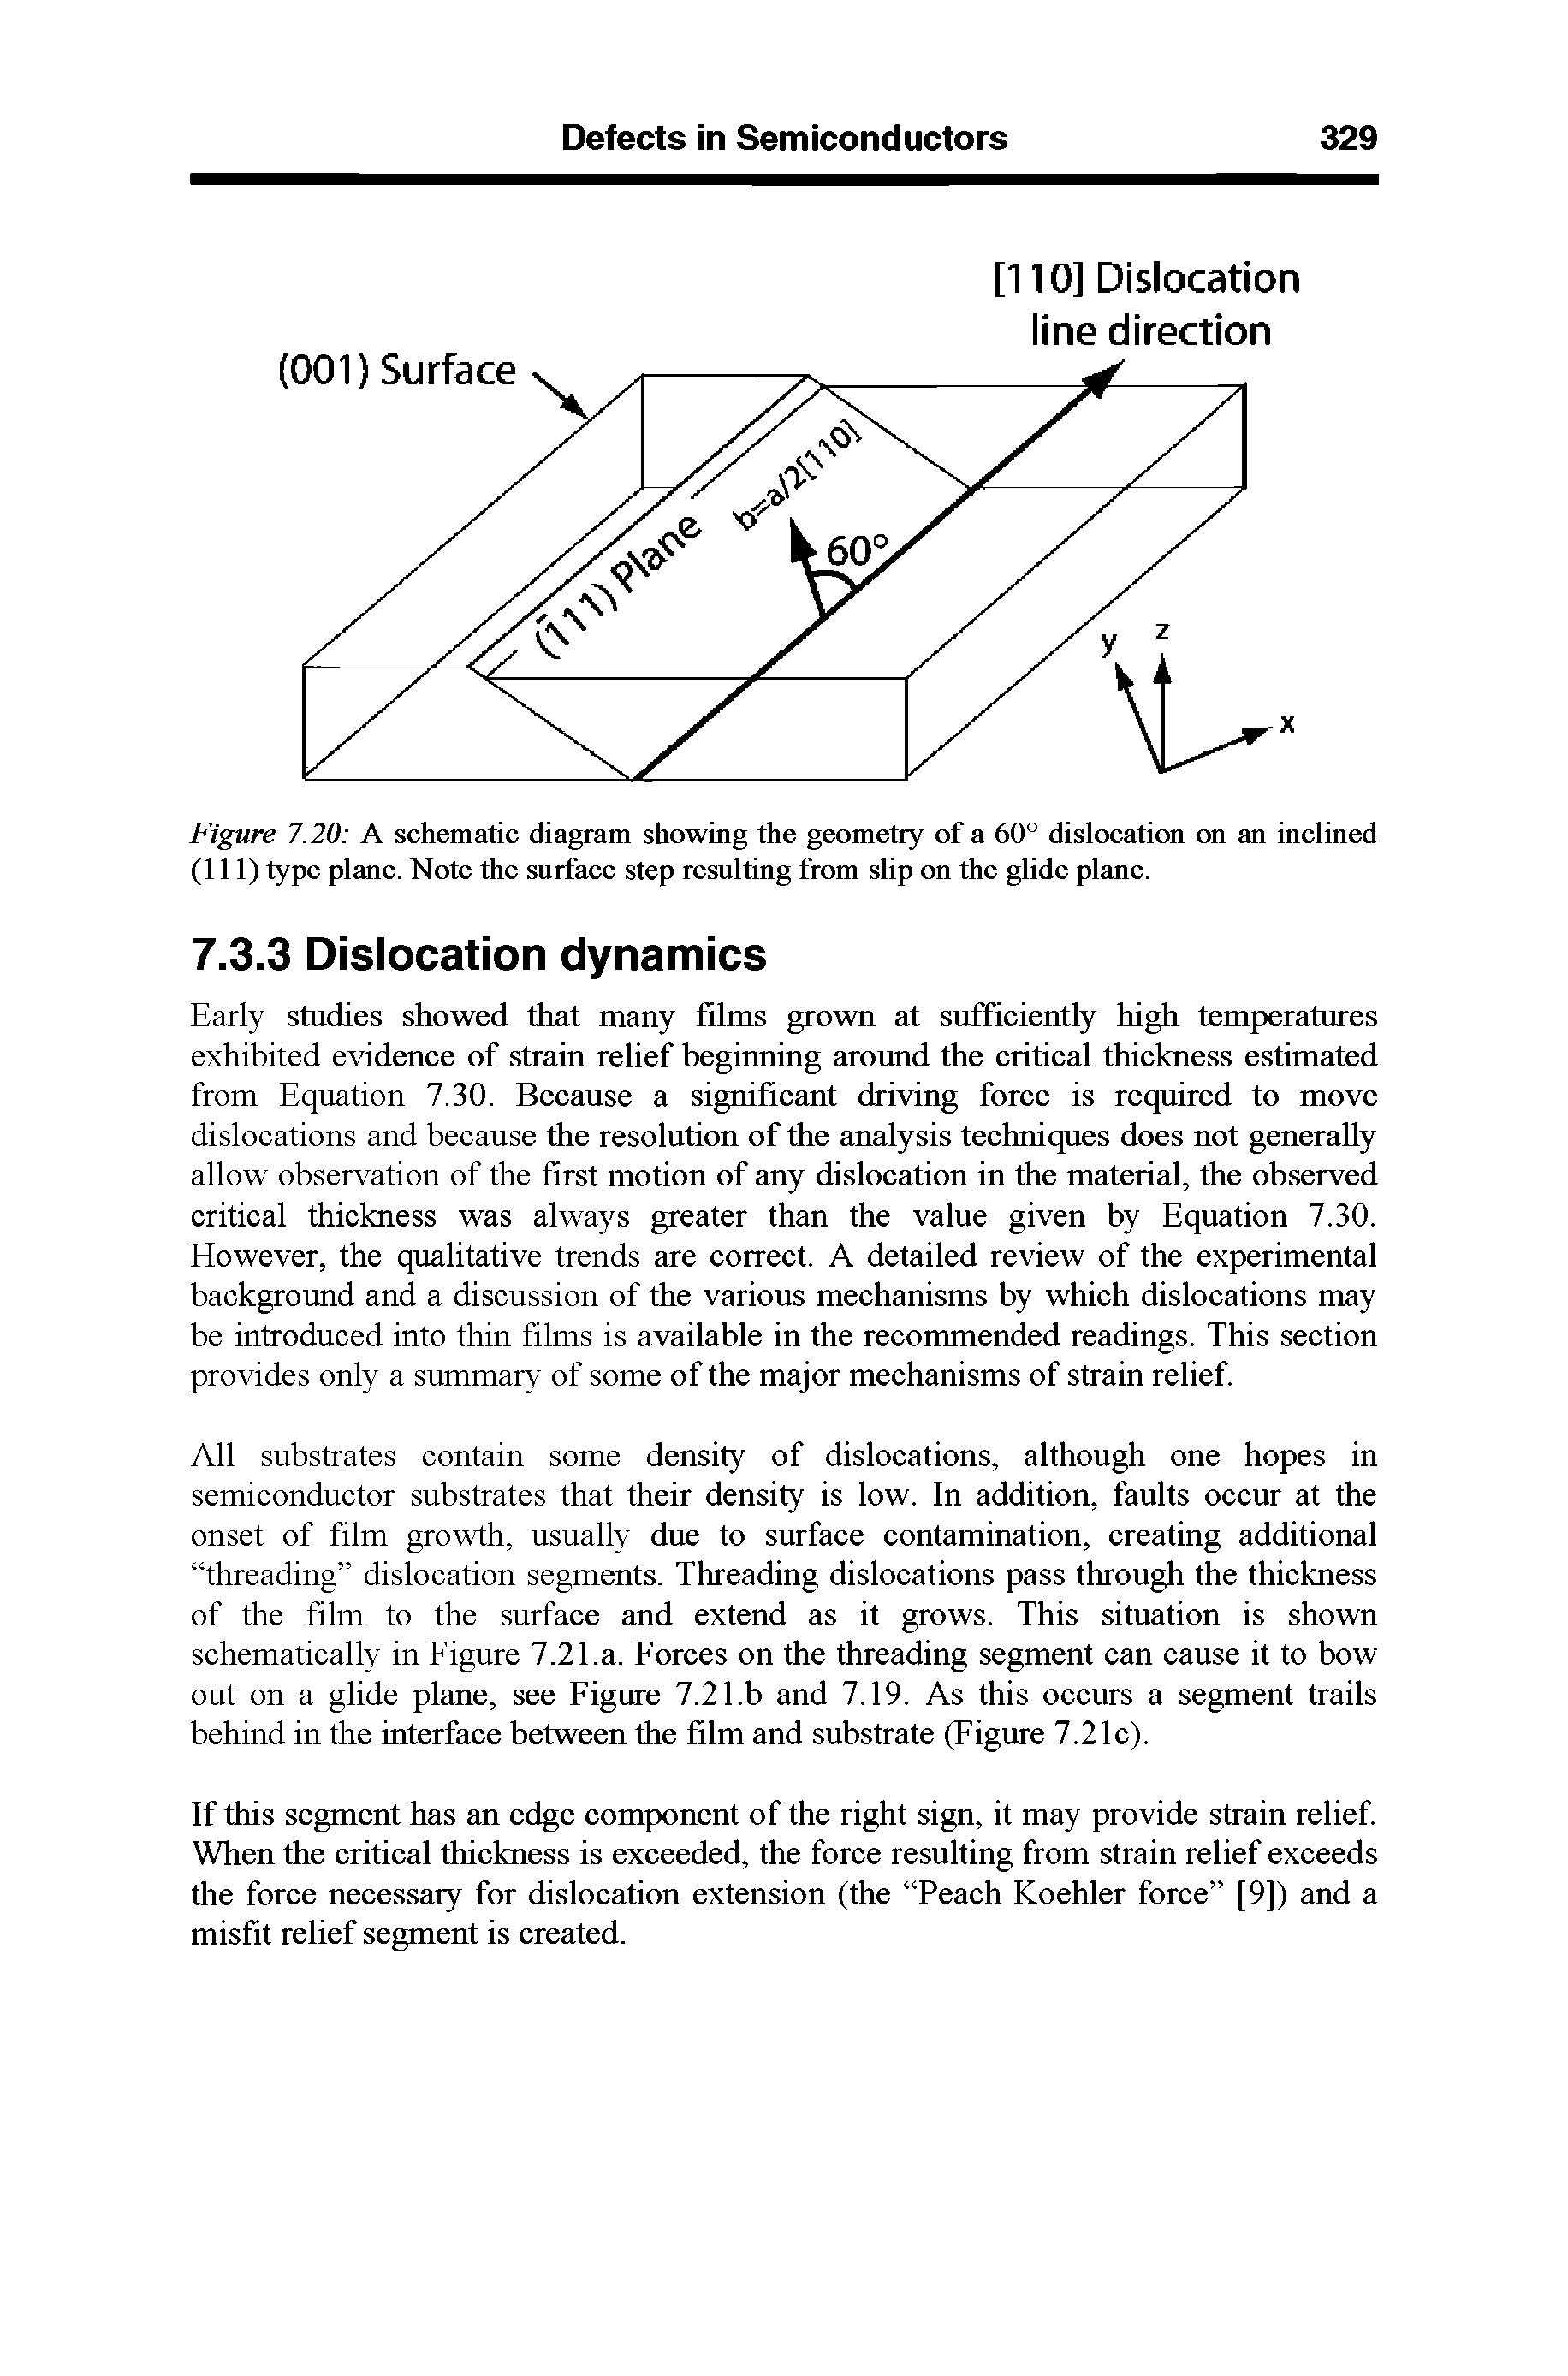 Figure 7.20 A schematic diagram showing the geometry of a 60° dislocation on an inclined (111) type plane. Note the surface step resulting from slip on the glide plane.